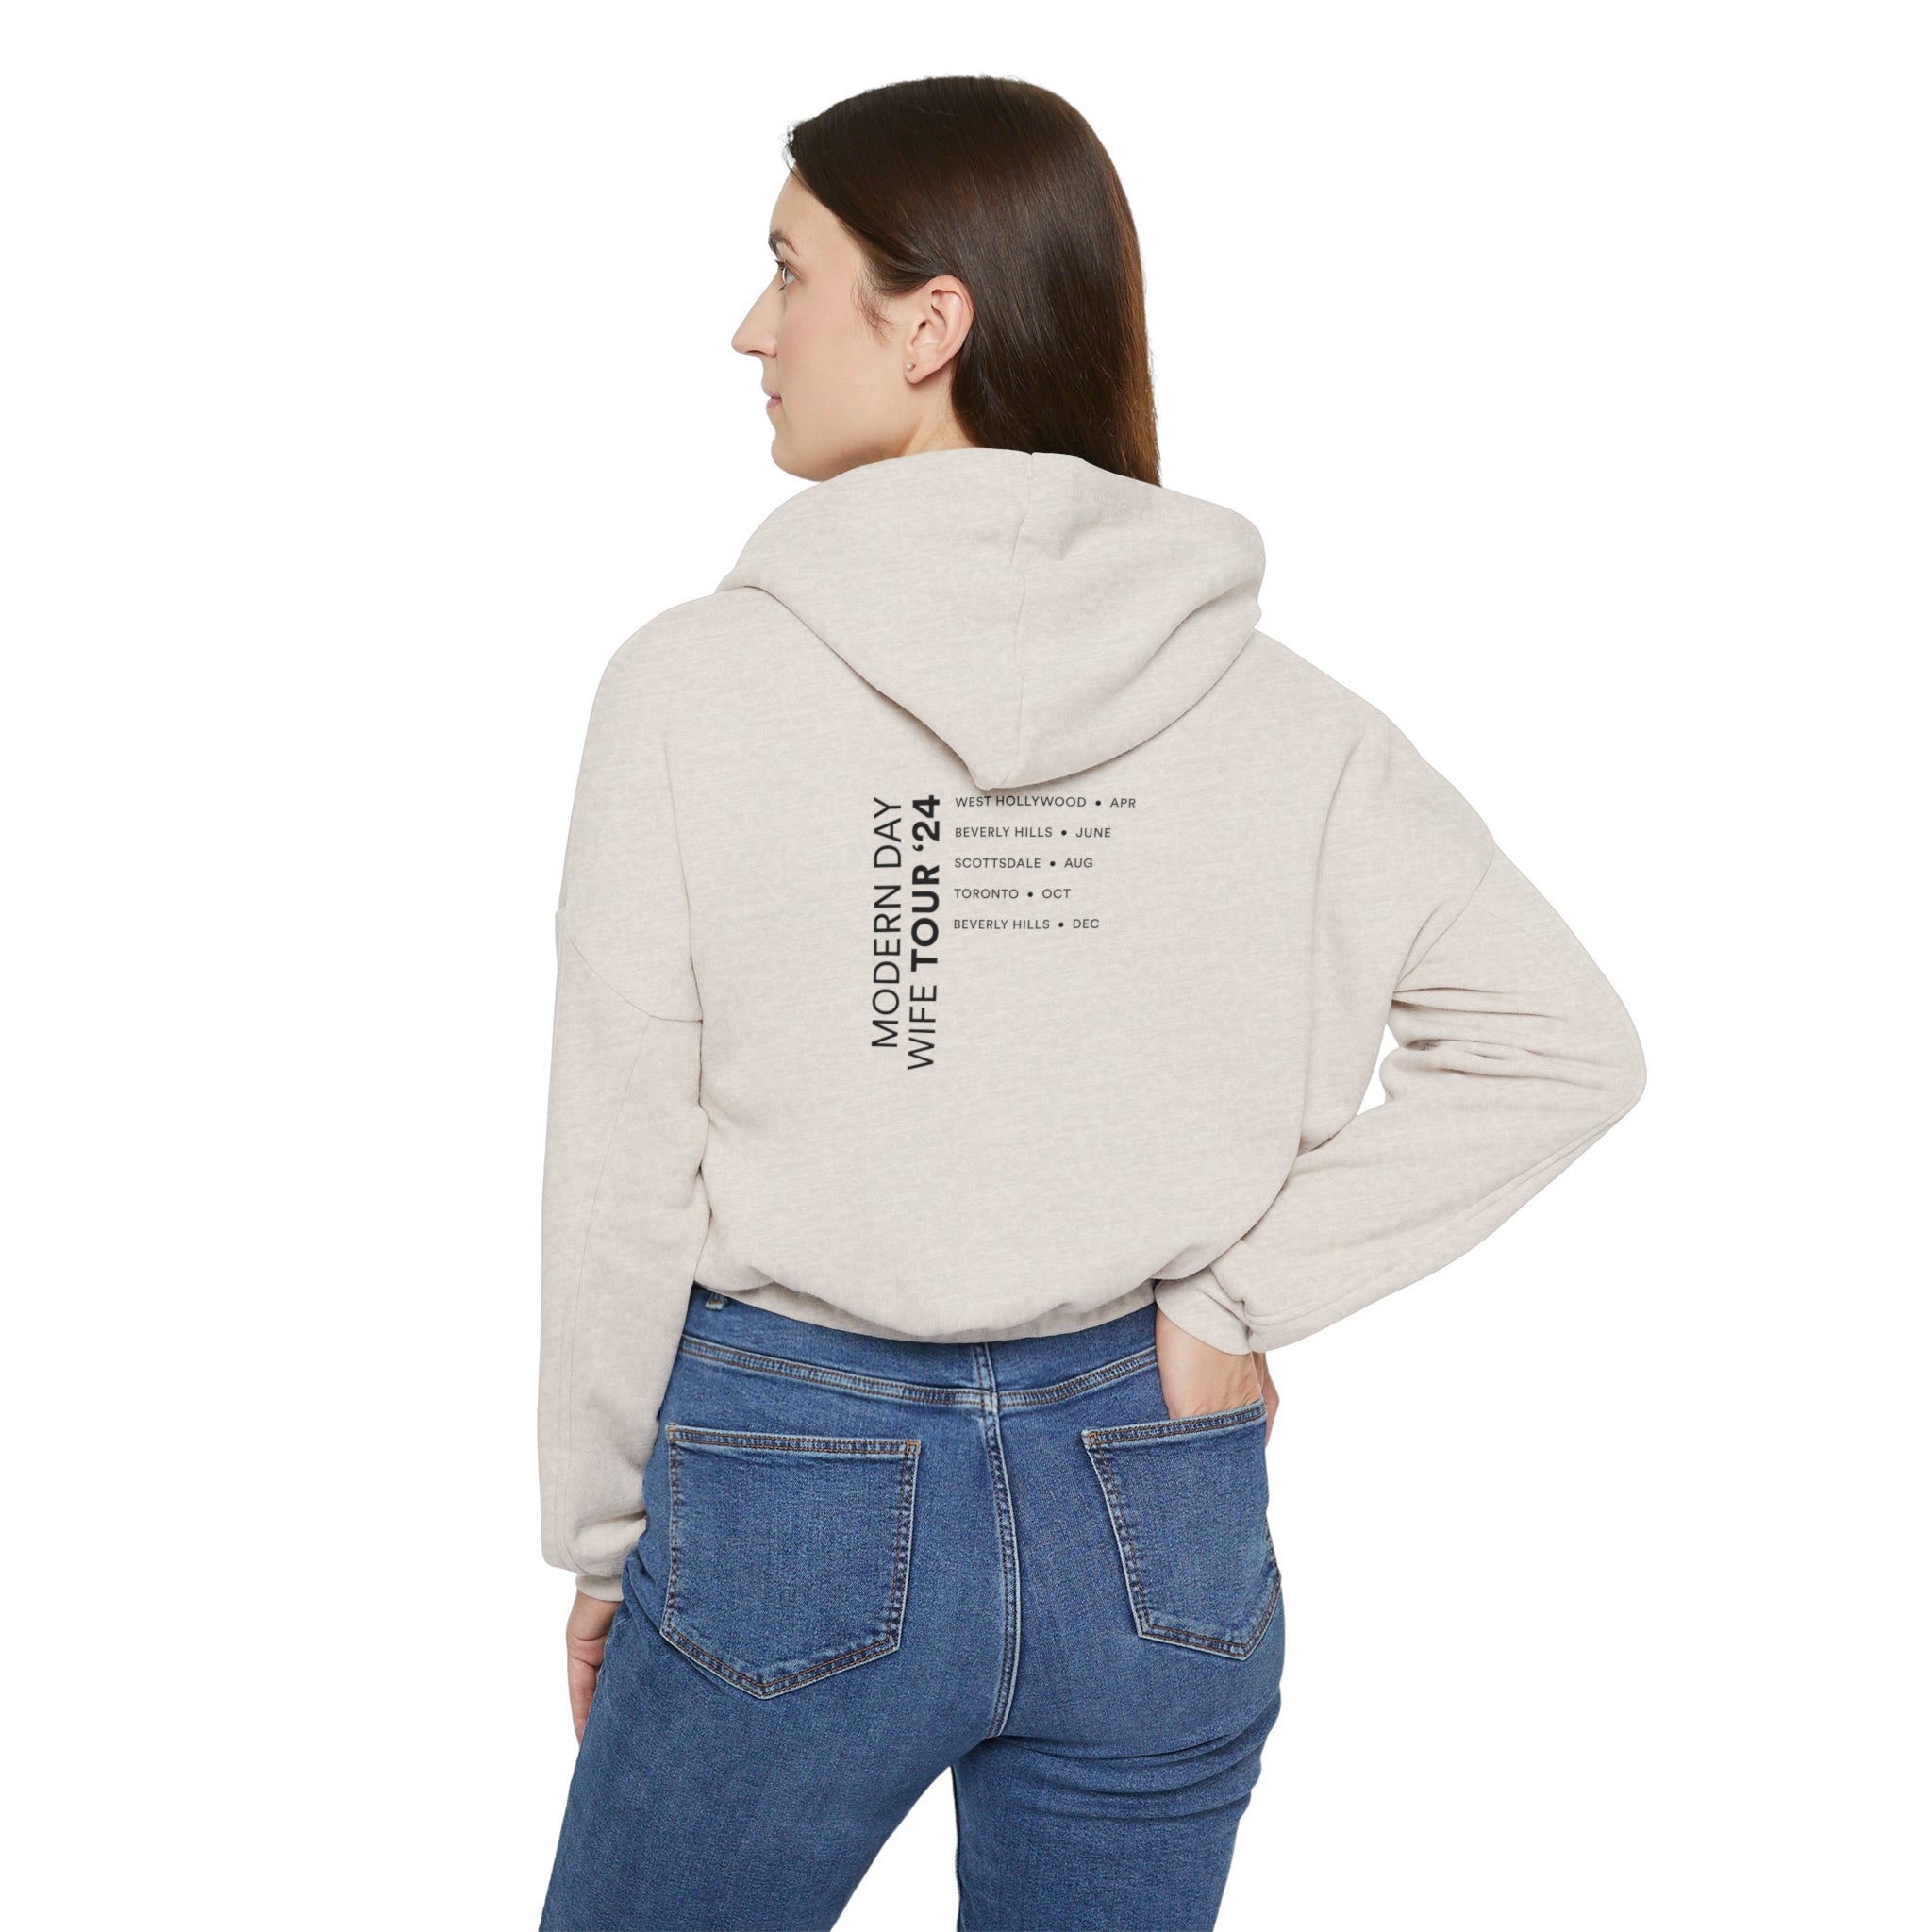 MDW Cinched Bottom Hoodie